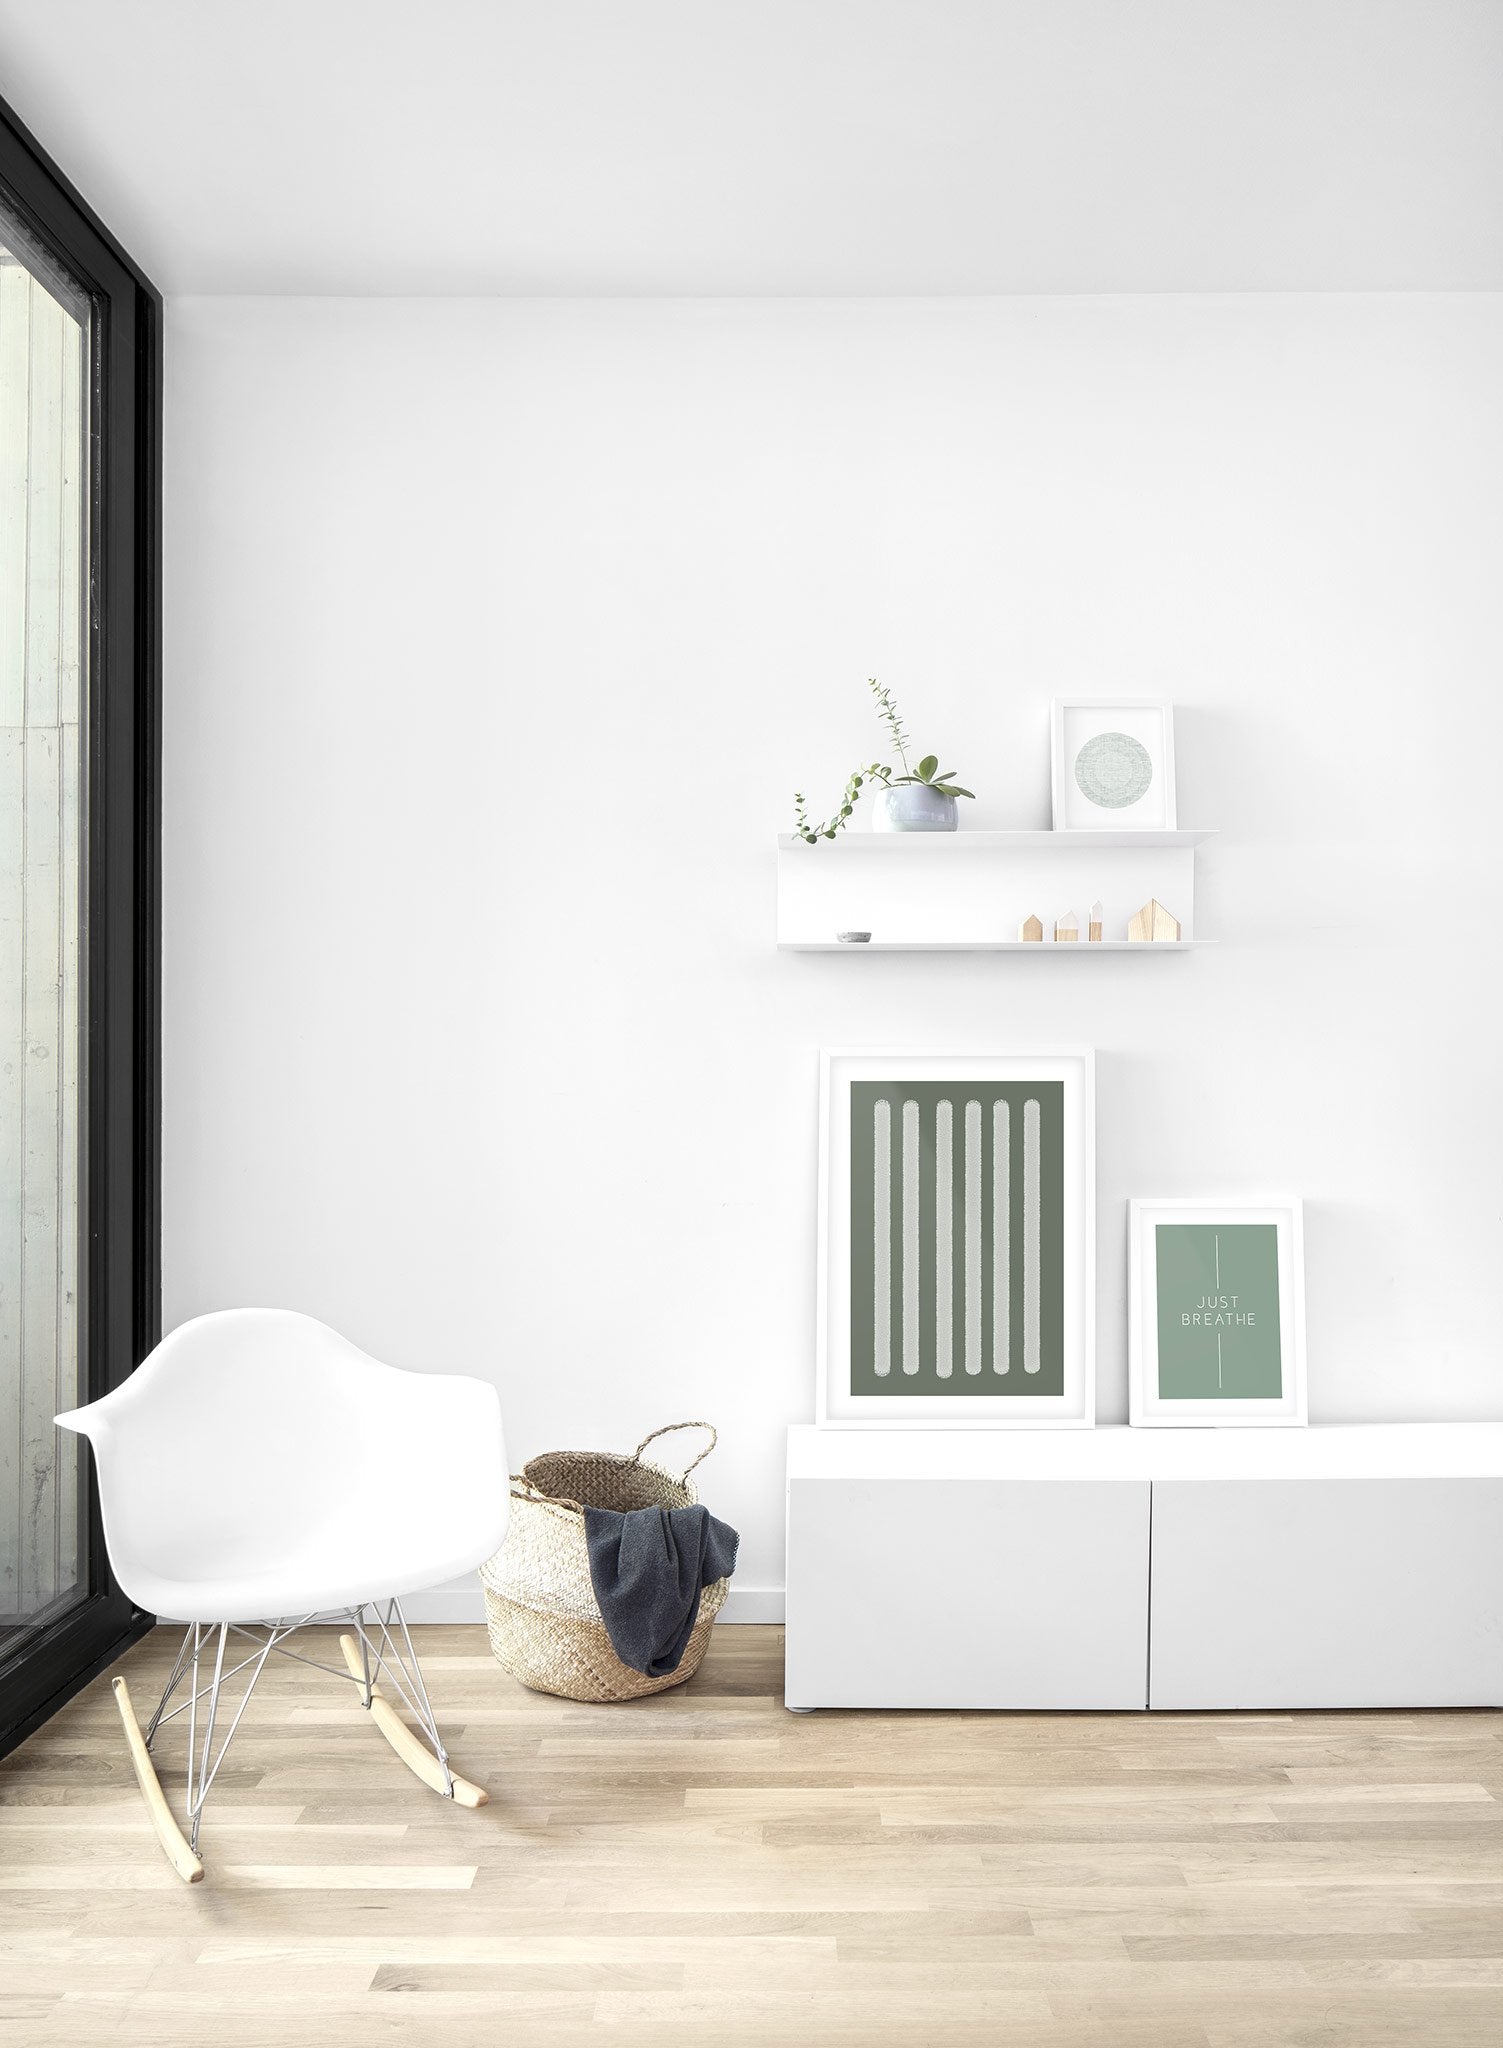 Minimalist design poster by Opposite Wall with abstract green rectangle shapes - Lifestyle Trio - Living Room